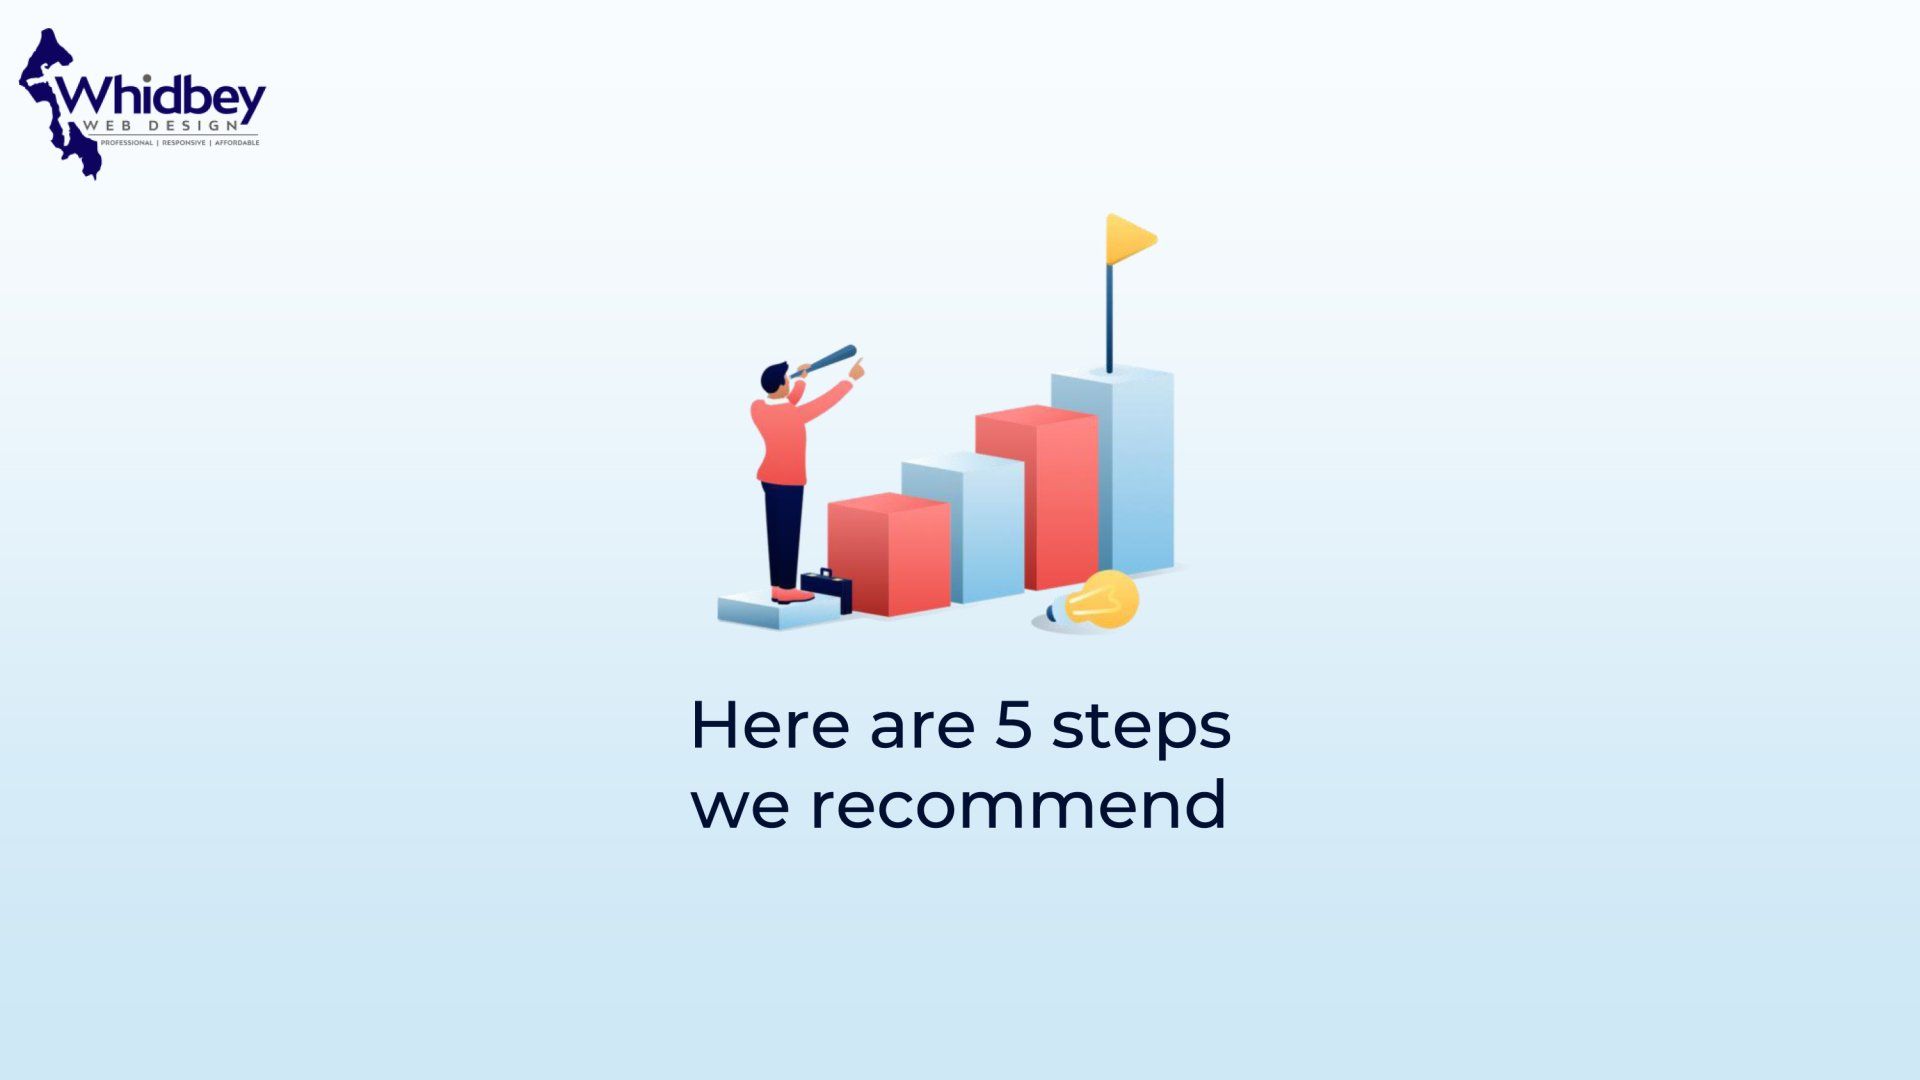 Here are 5 steps we recommend